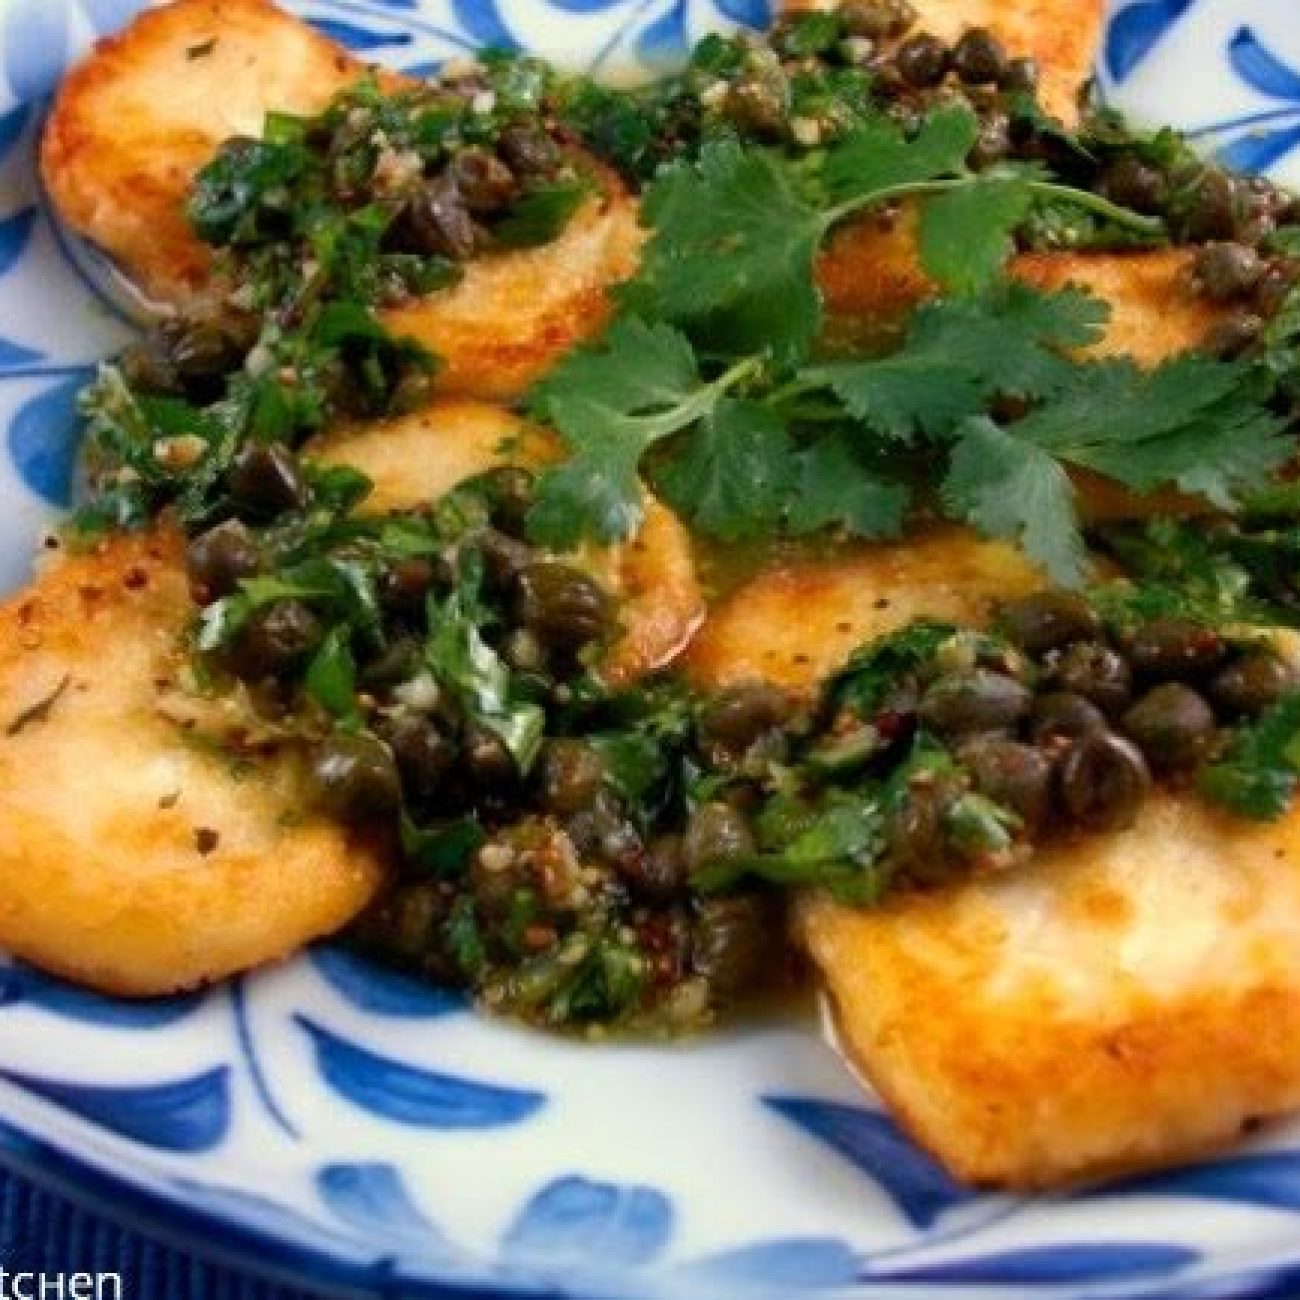 Fried Halloumi Cheese With Caper